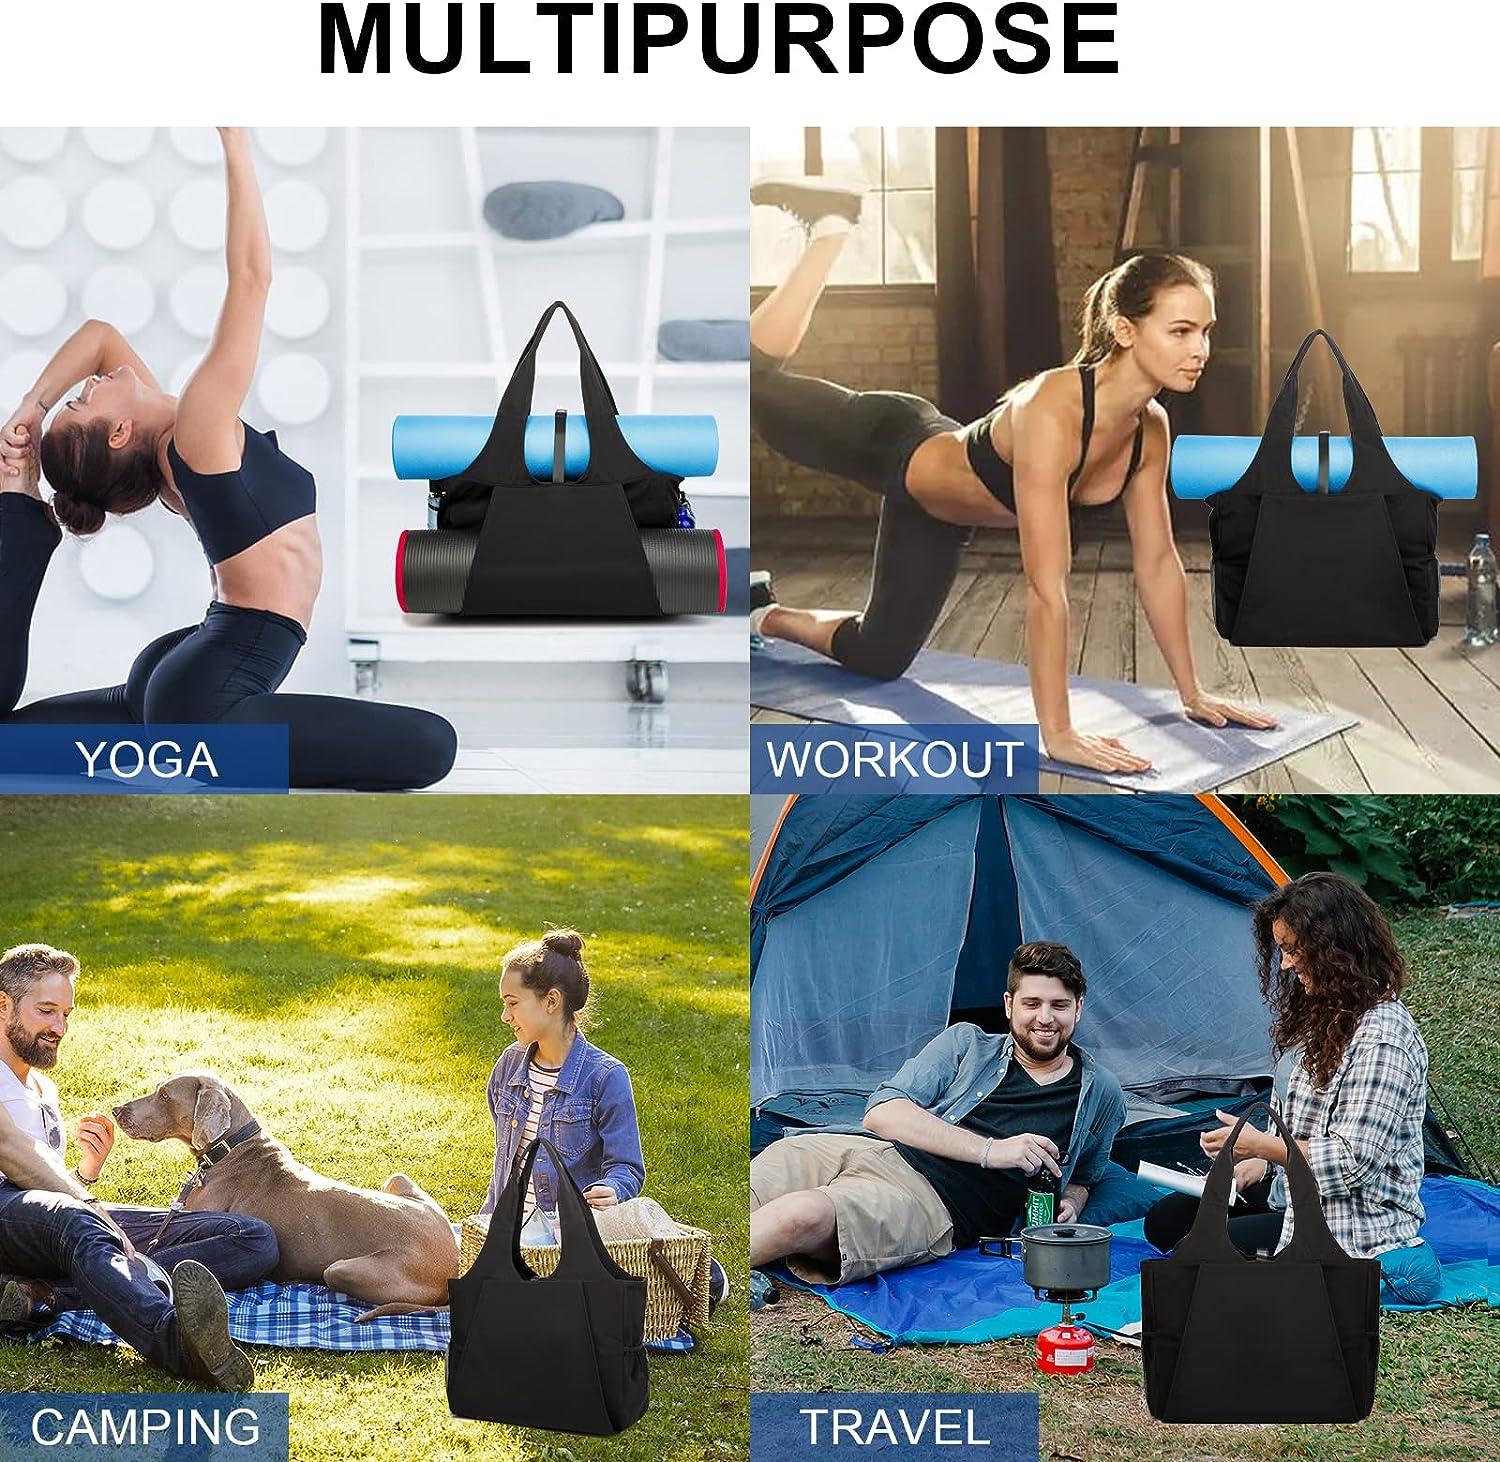 KUAK Yoga Mat Bag for Women, Large Waterproof Yoga Bags and Carriers, Gym  Bag with 2 Yoga Mat Holders, 6 Pockets, Shoulder Bag Carryall Tote for  Pilates, Workout Black